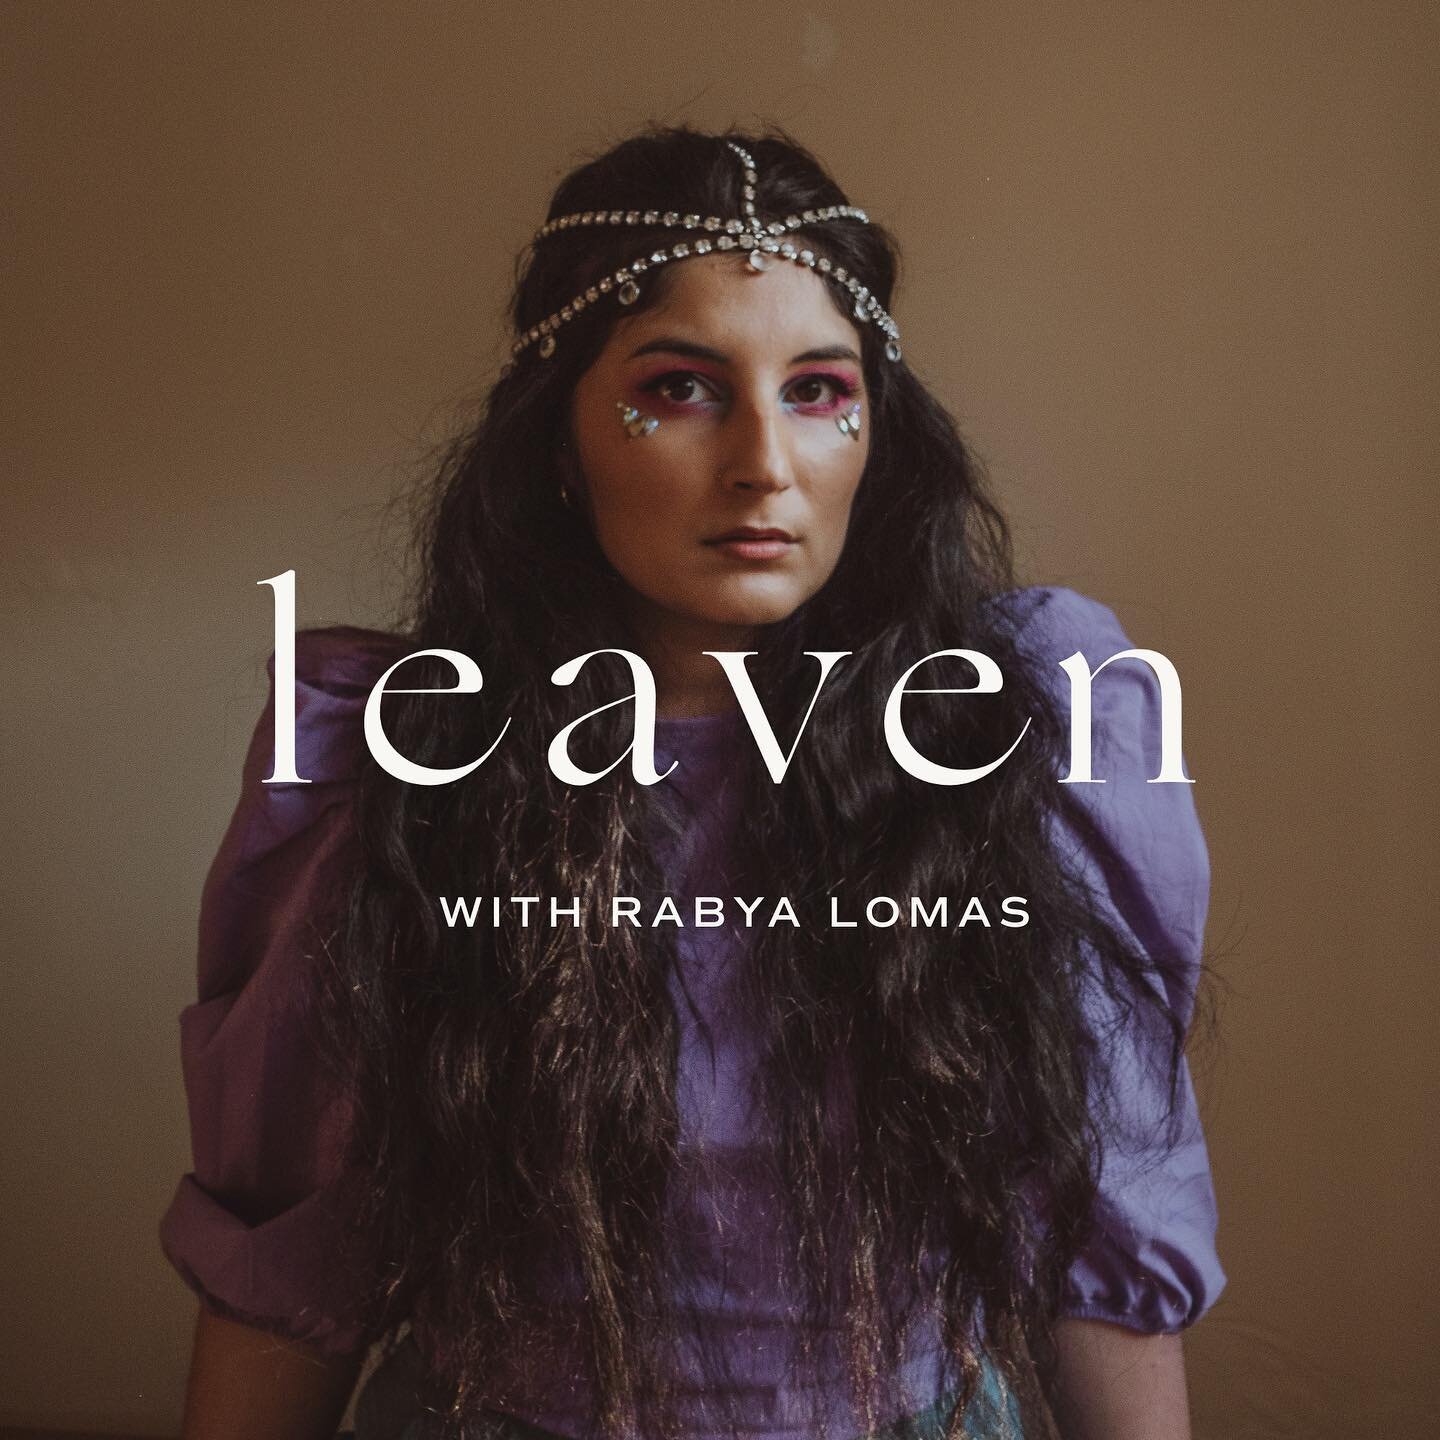 Today&rsquo;s conversation is with Rabya Lomas. Rabya is a photographer, activist, coach and podcaster who creates space for marginalised folk, influencing inclusion across social media and in the workplace. I discovered Rabya&rsquo;s work when seeki